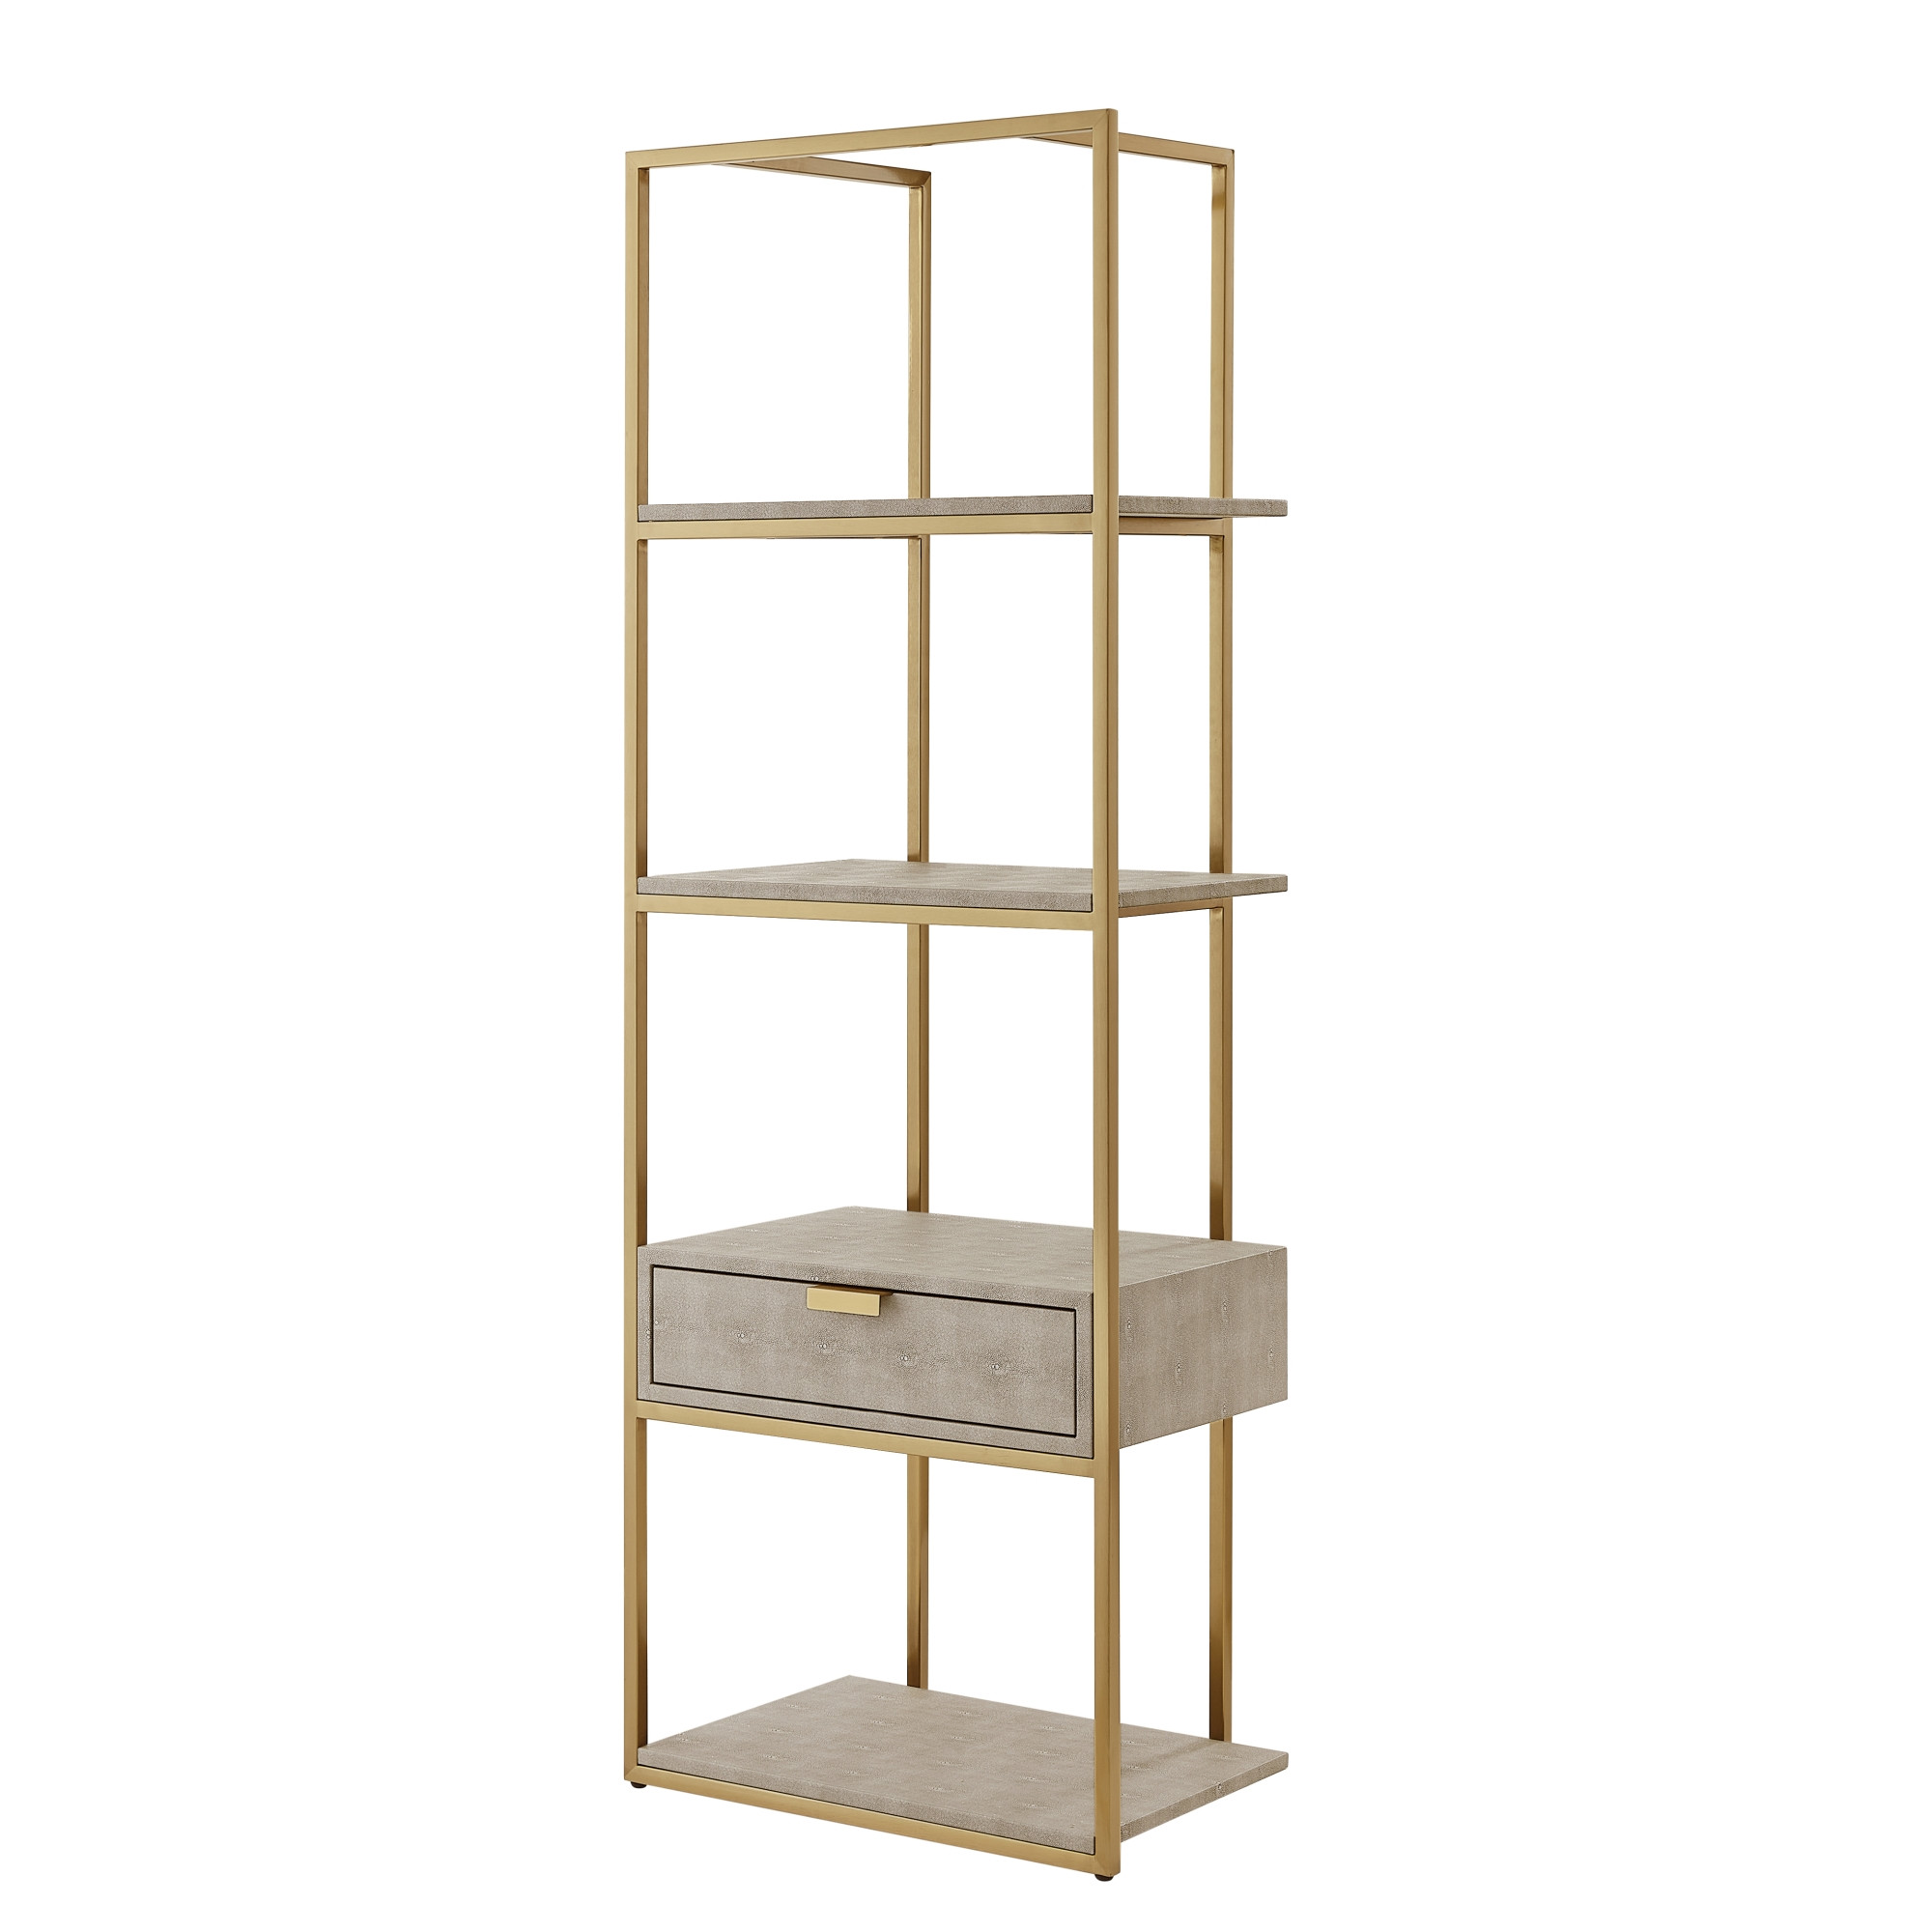 68" Cream Stainless Steel Four Tier Etagere Bookcase with a drawer-544740-1